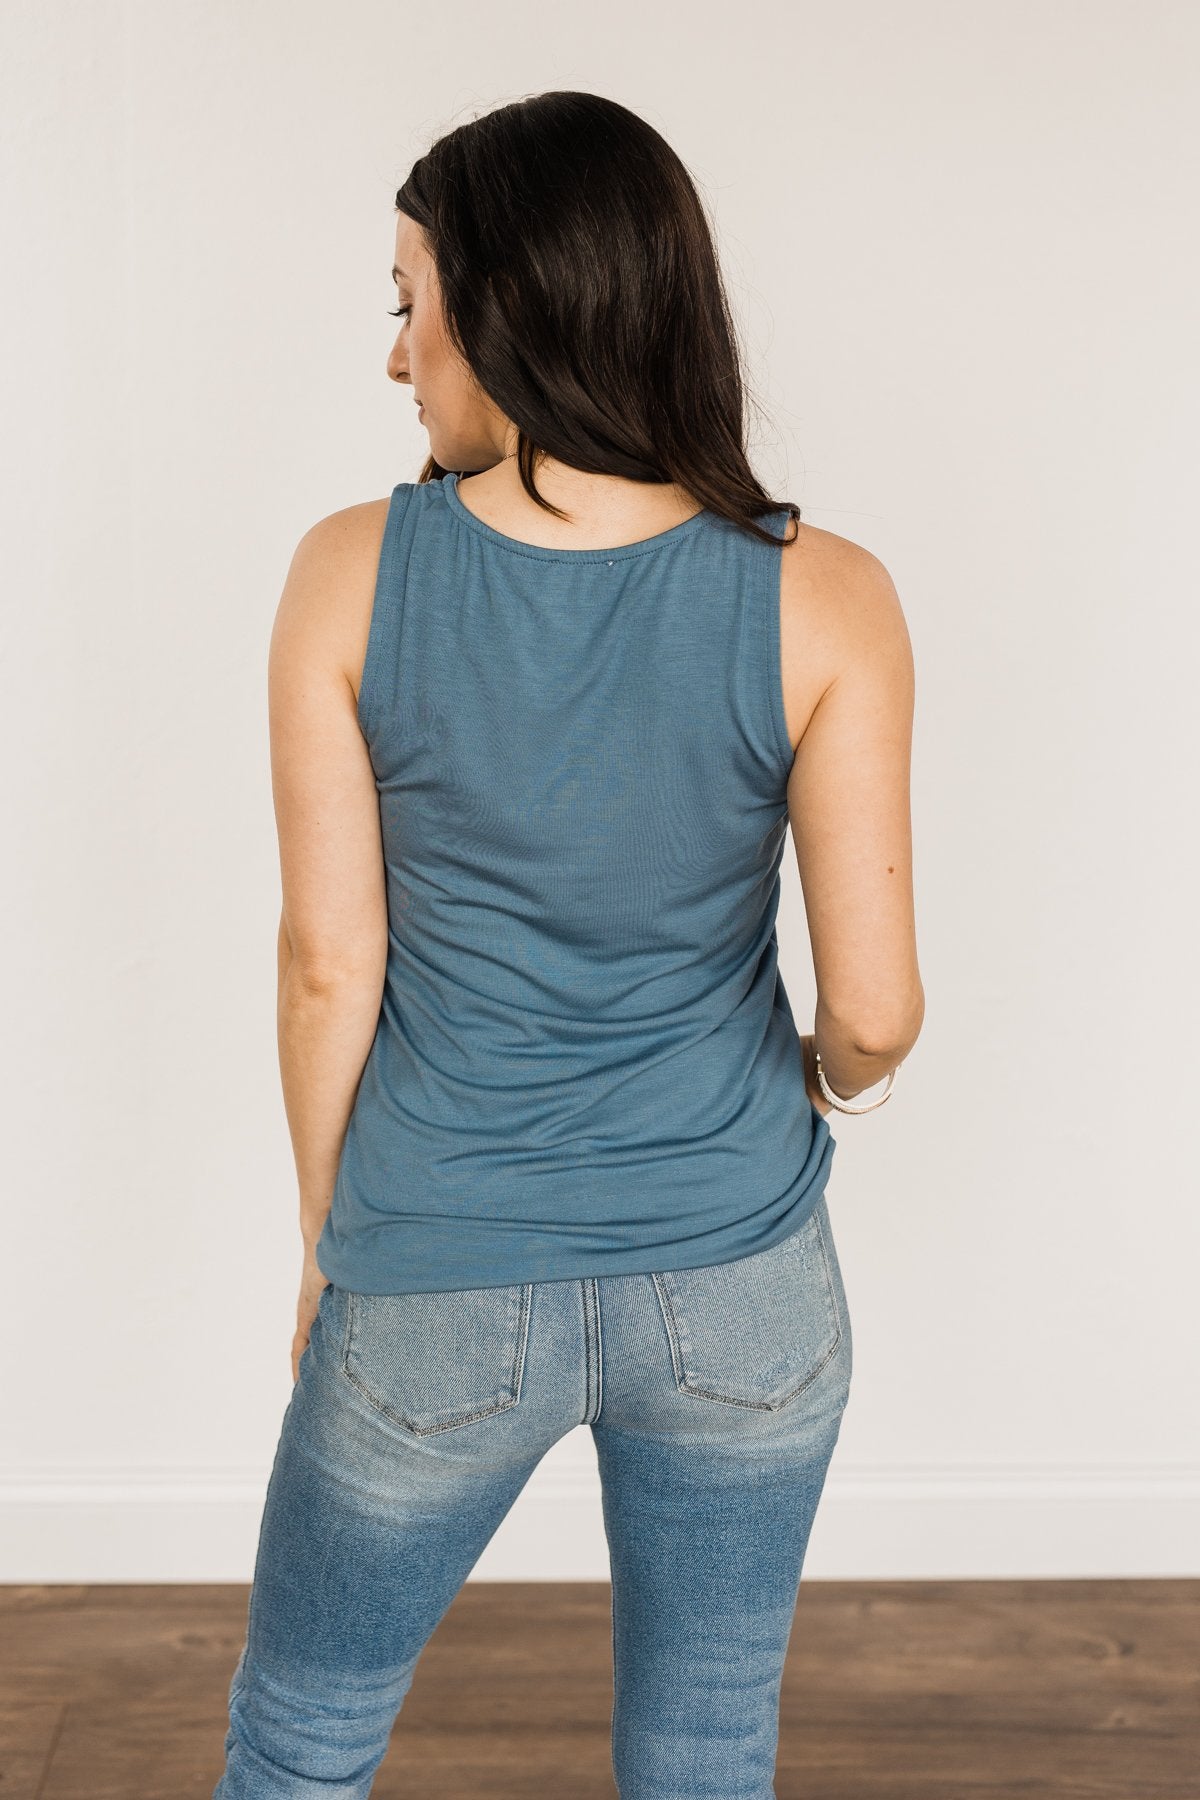 Places to Go Criss-Cross Tank Top- Steel Blue